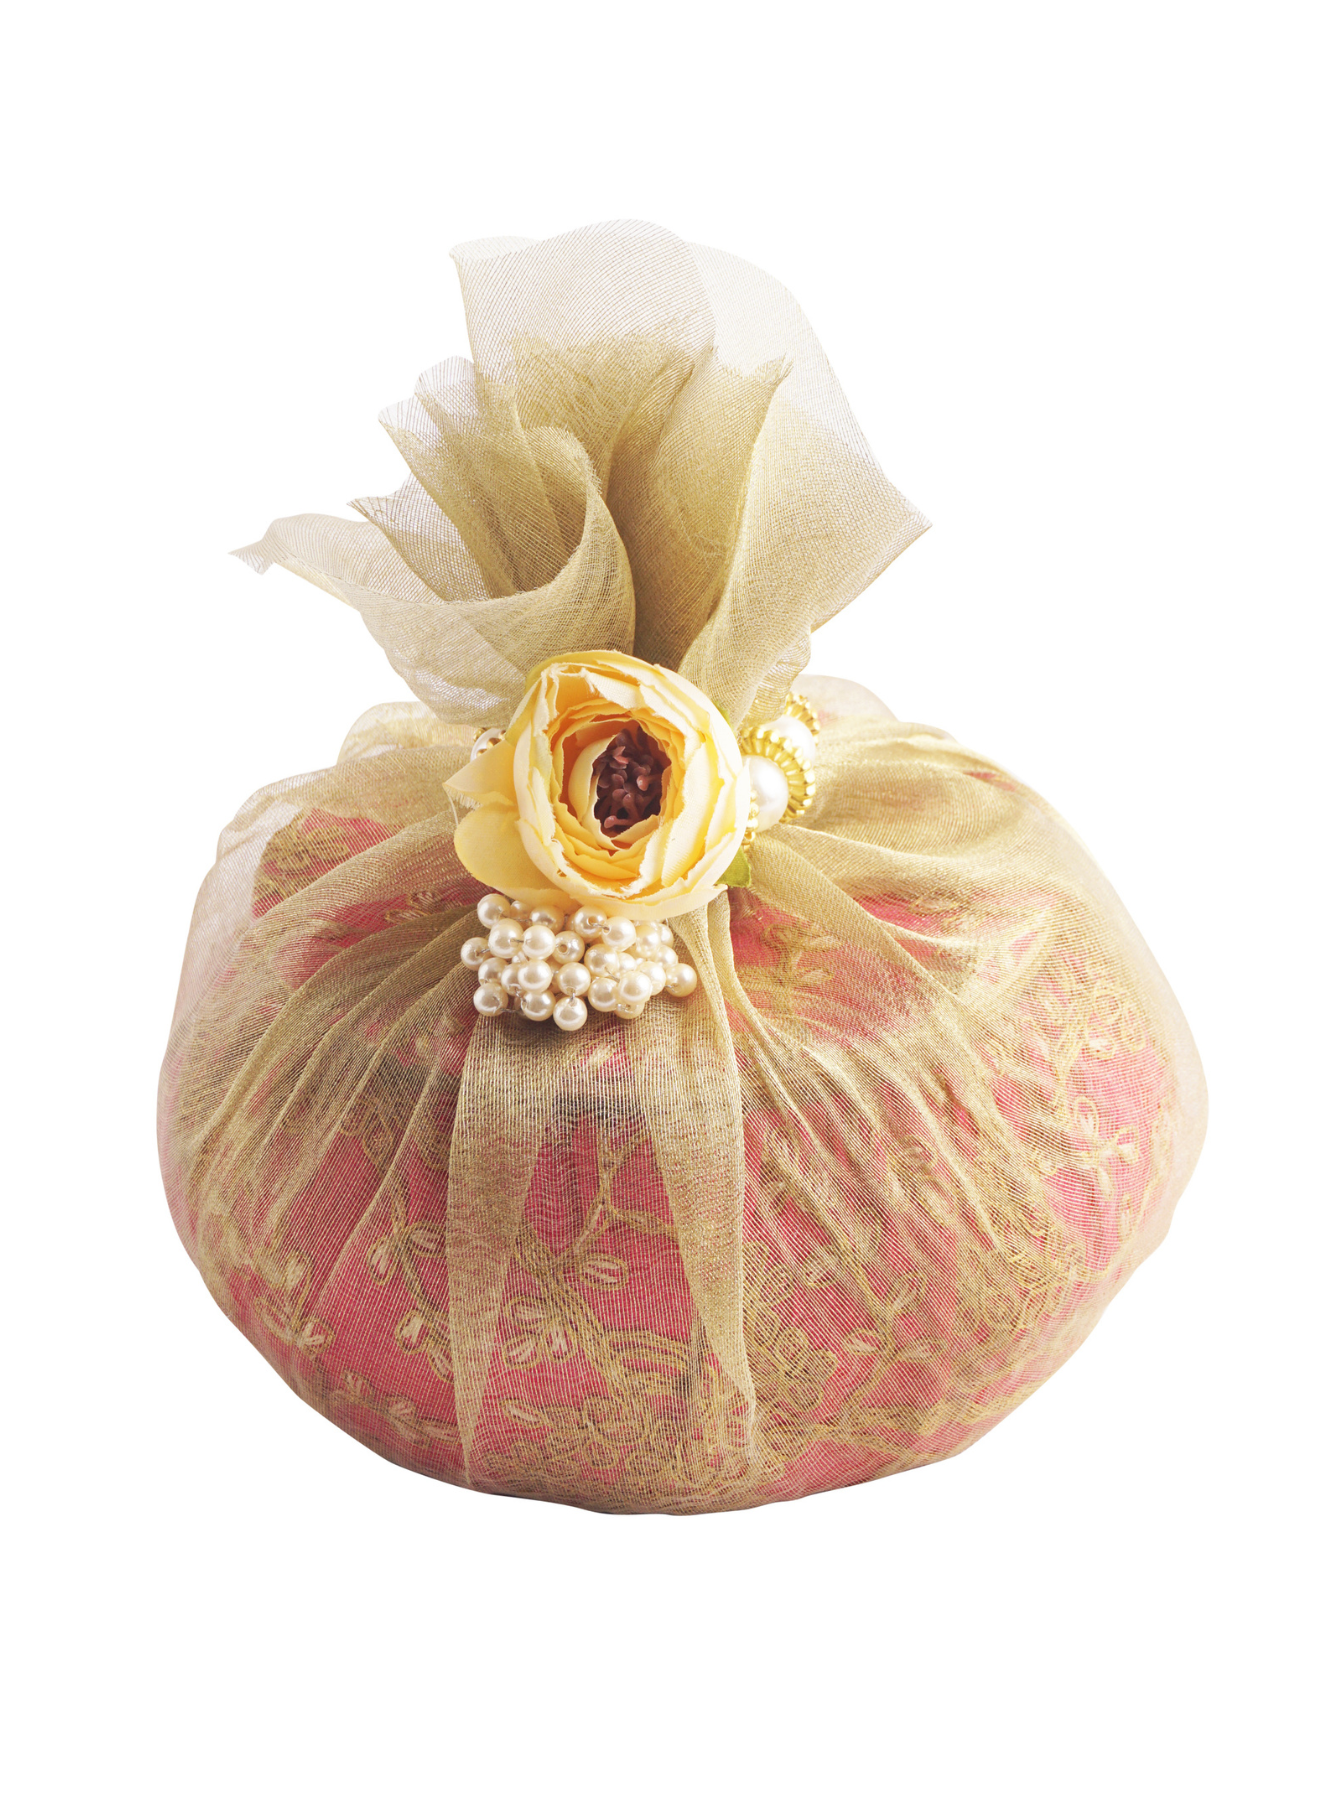 Safawi Dates with Adorned Matki with Tissue Wrap (16 Individually Wrapped Pcs)